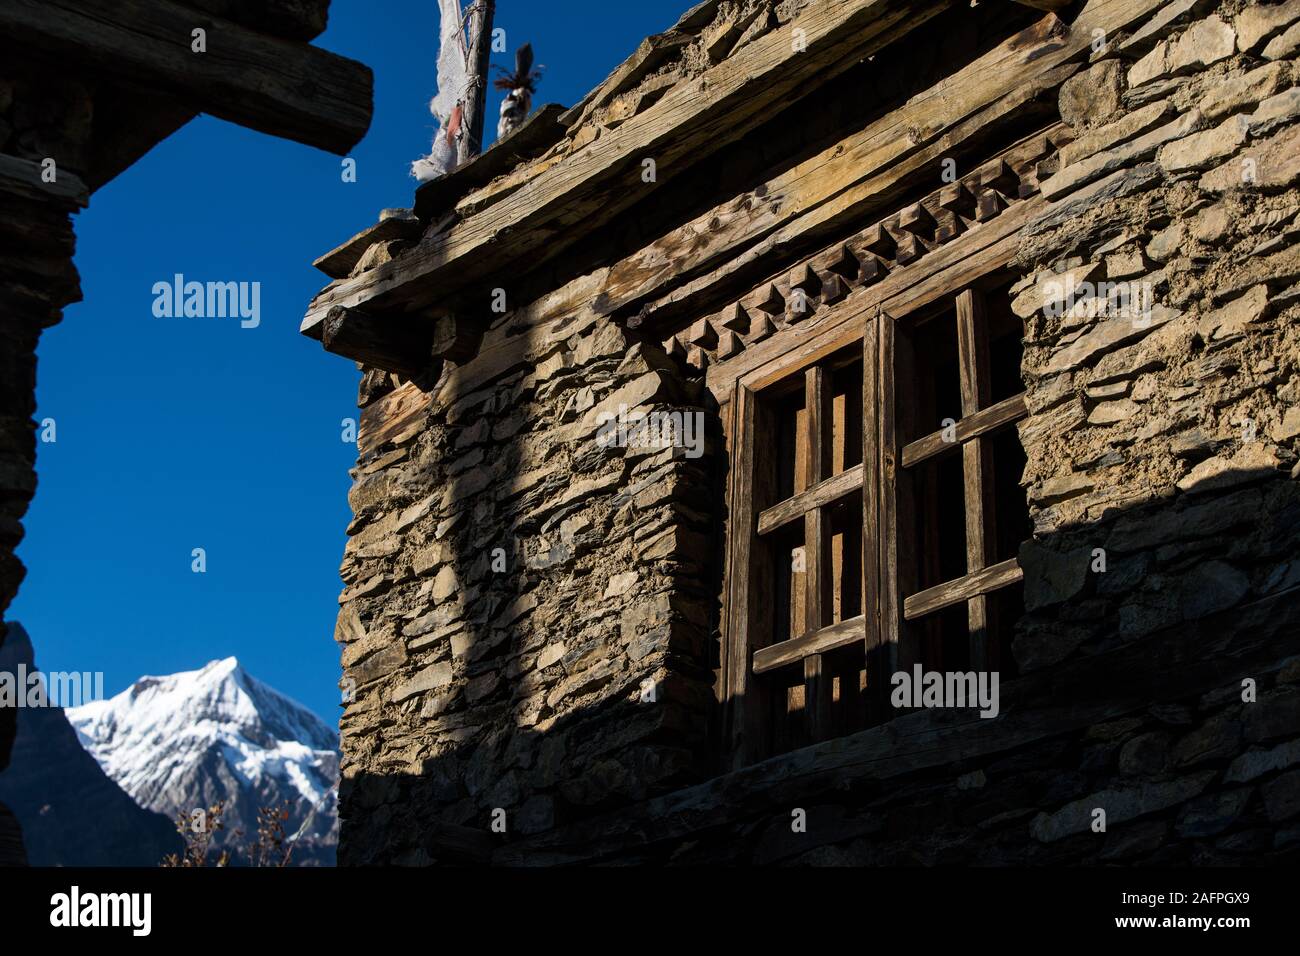 Homes of the Nepalese mountains Stock Photo